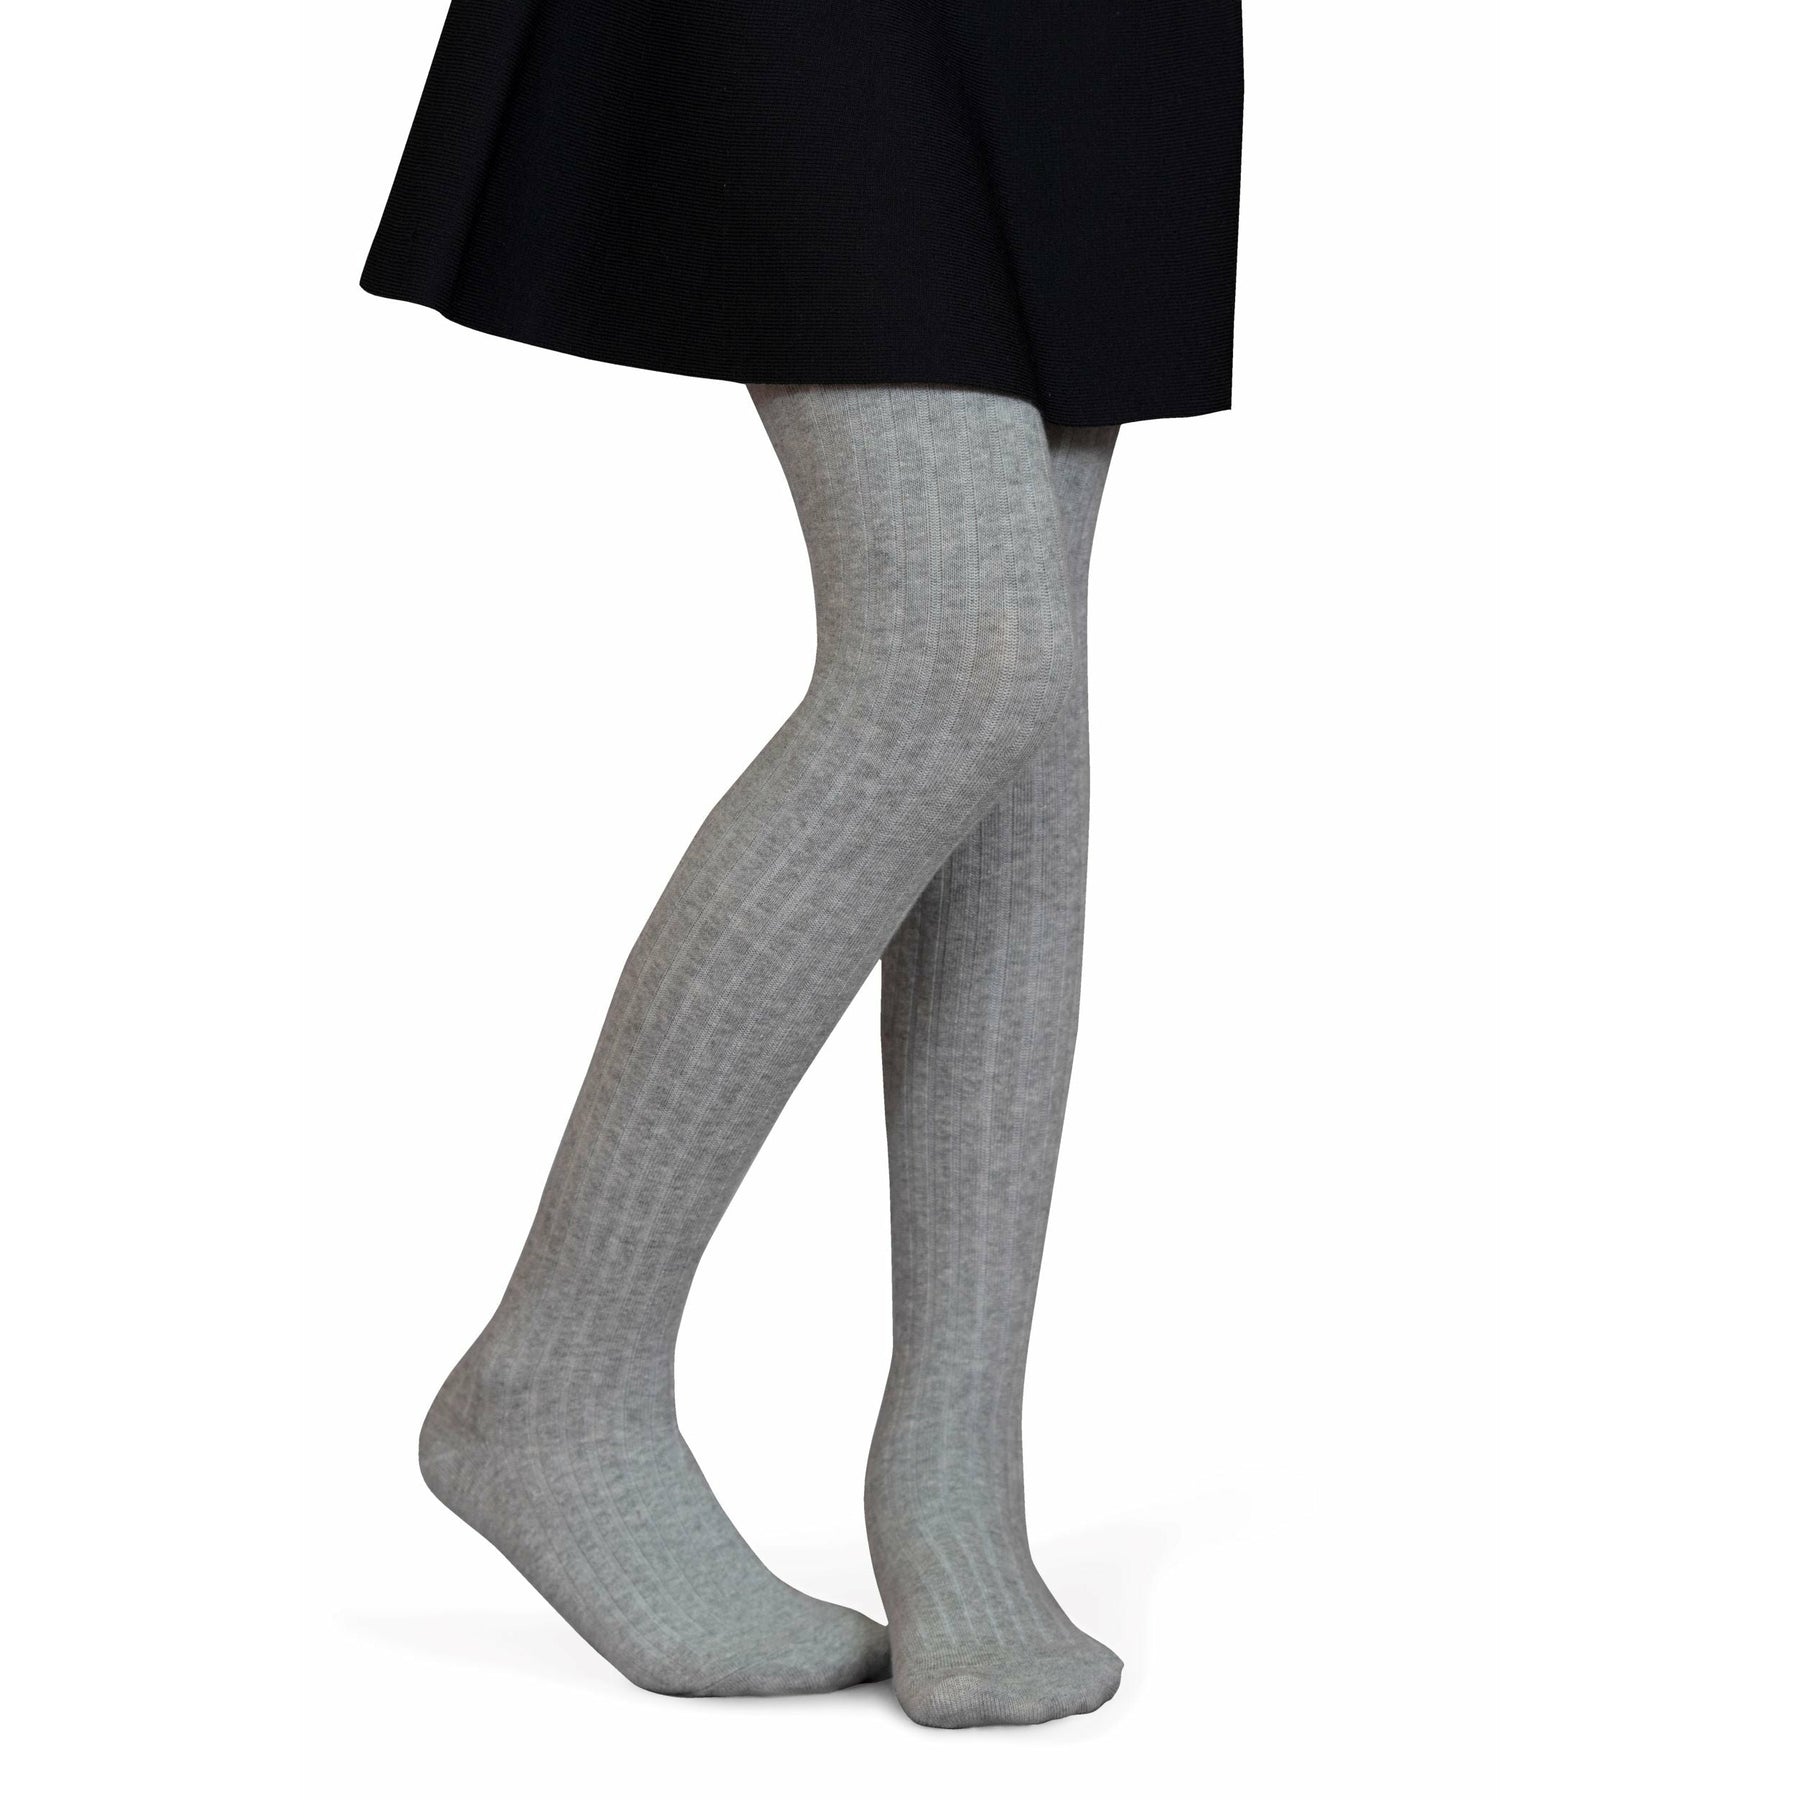 Grey Stockings Clearance Discounted